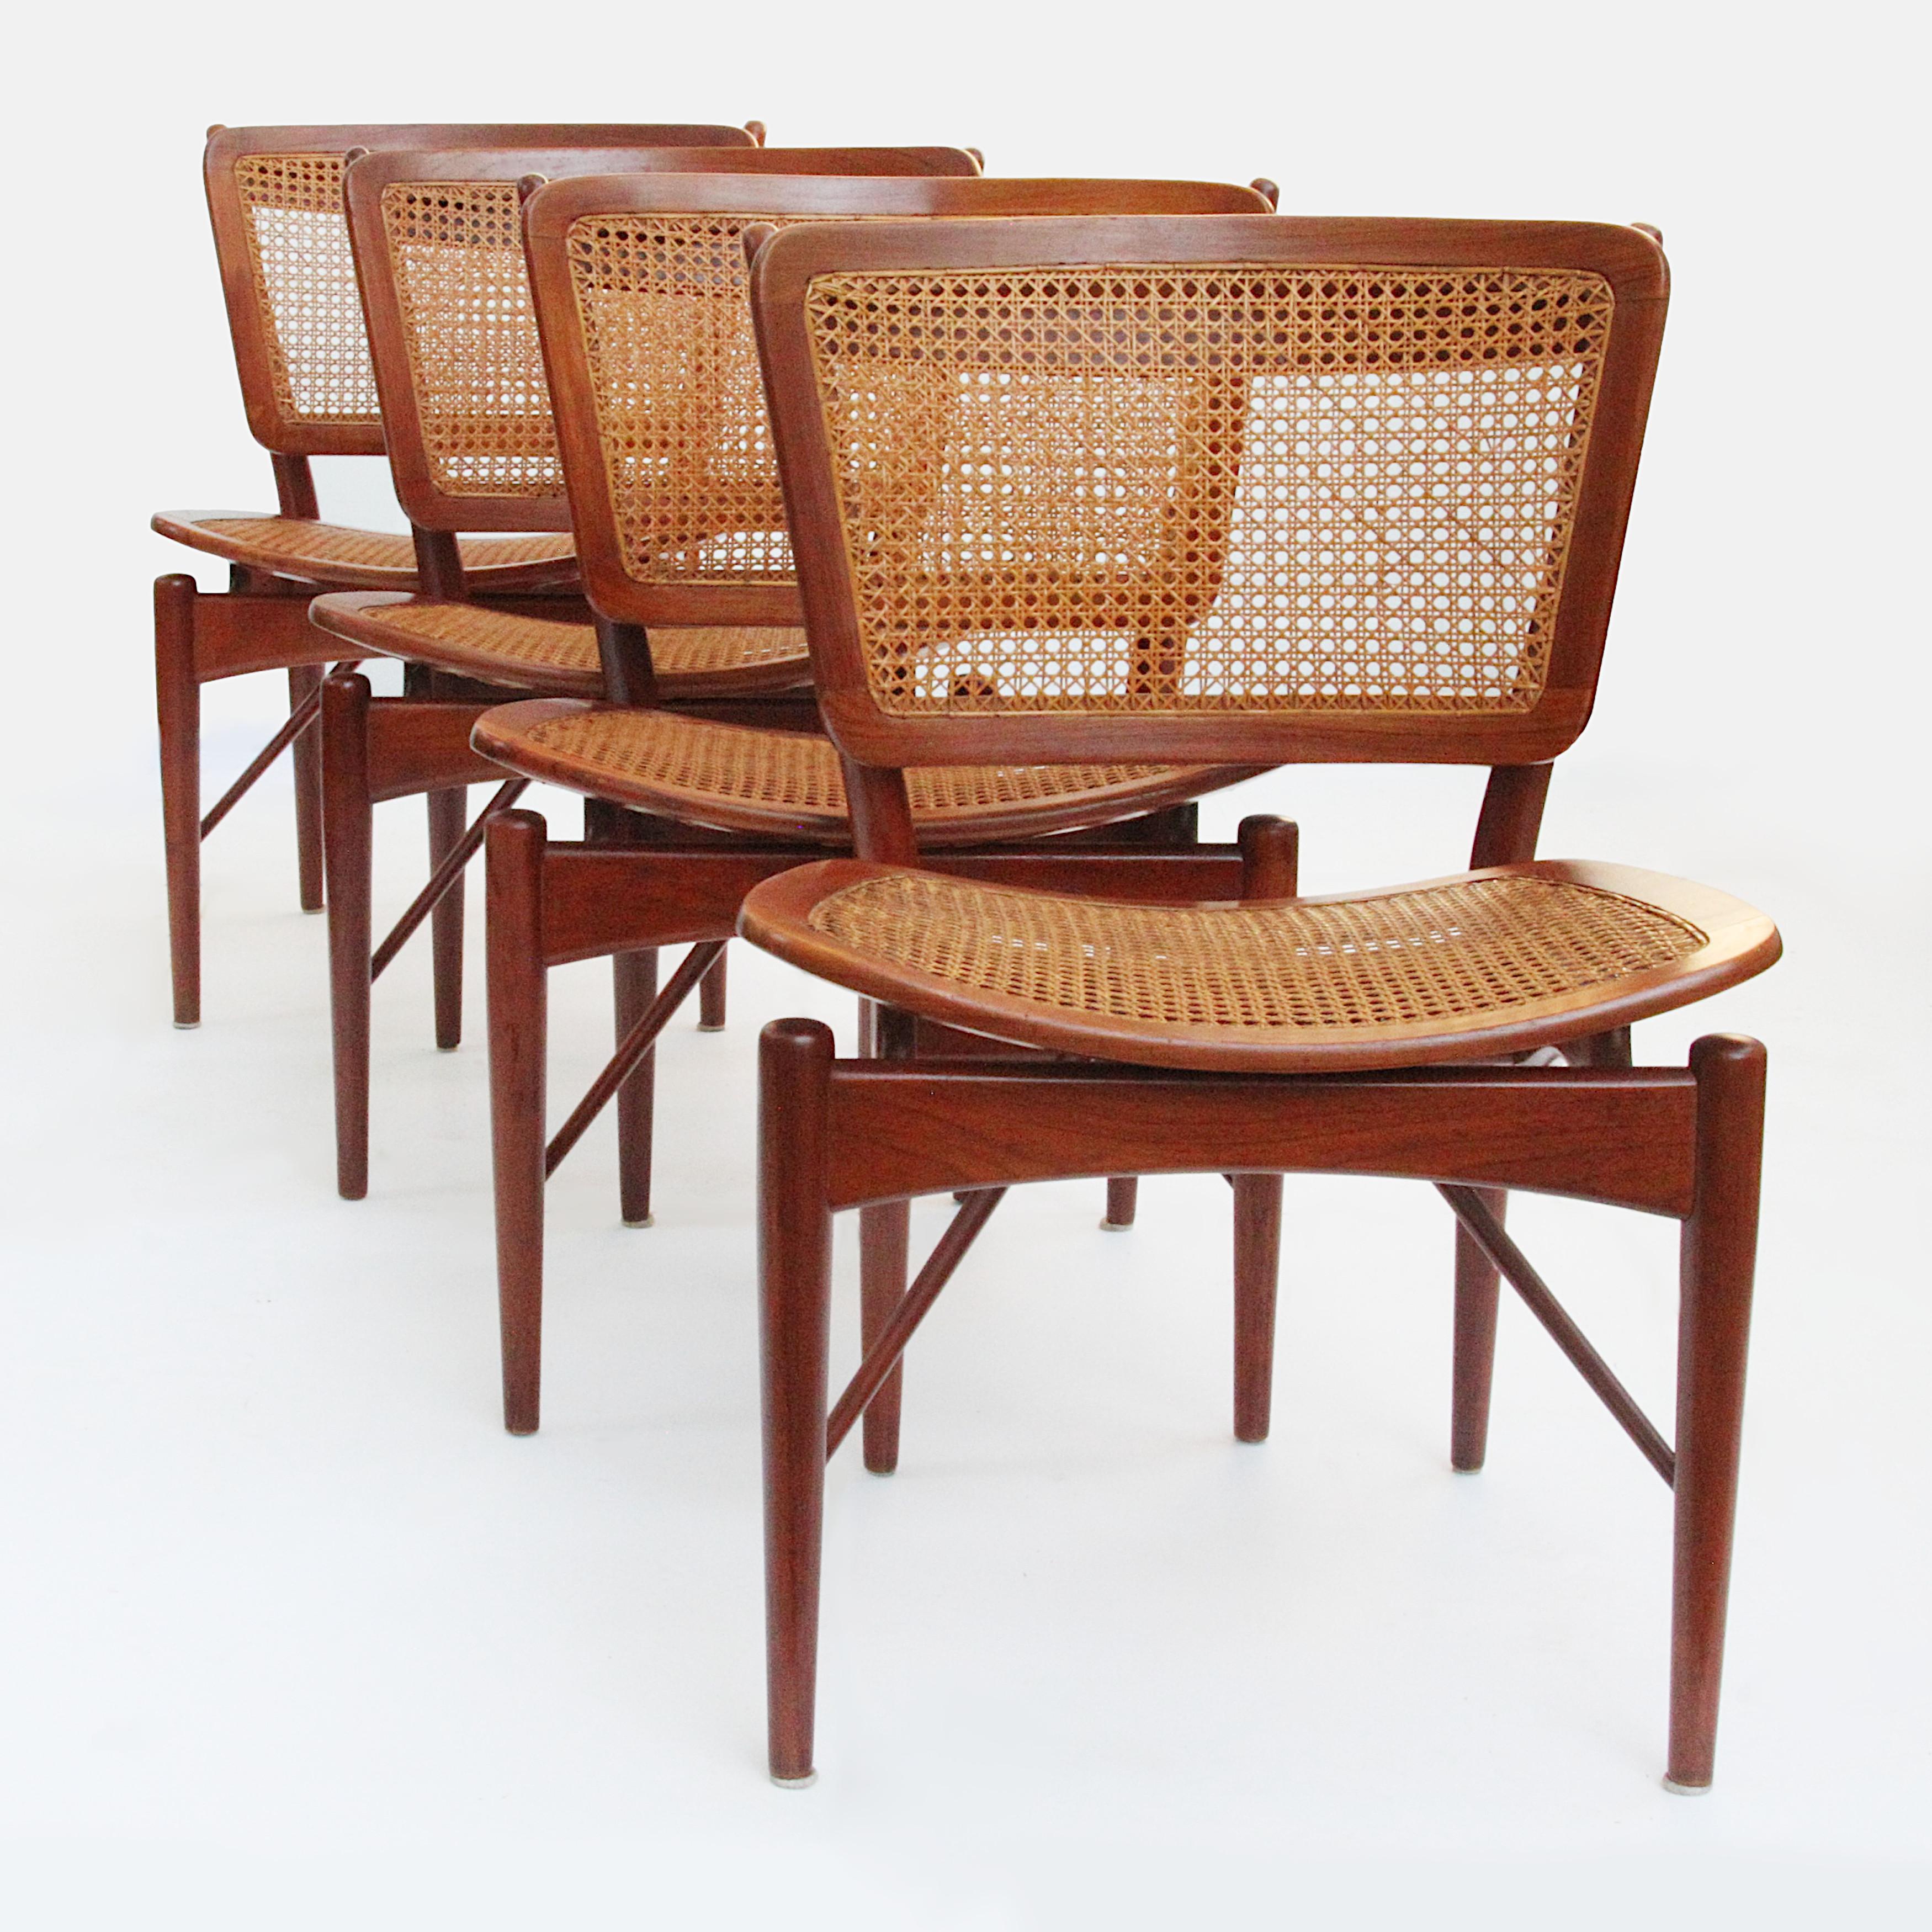 Magnificent set of Model 51/403 chairs designed by Finn Juhl for Baker's Modern line. Chairs feature beautifully sculpted, solid teak frames and woven cane inserts. These chairs are in remarkable original condition with a wonderful patina to the